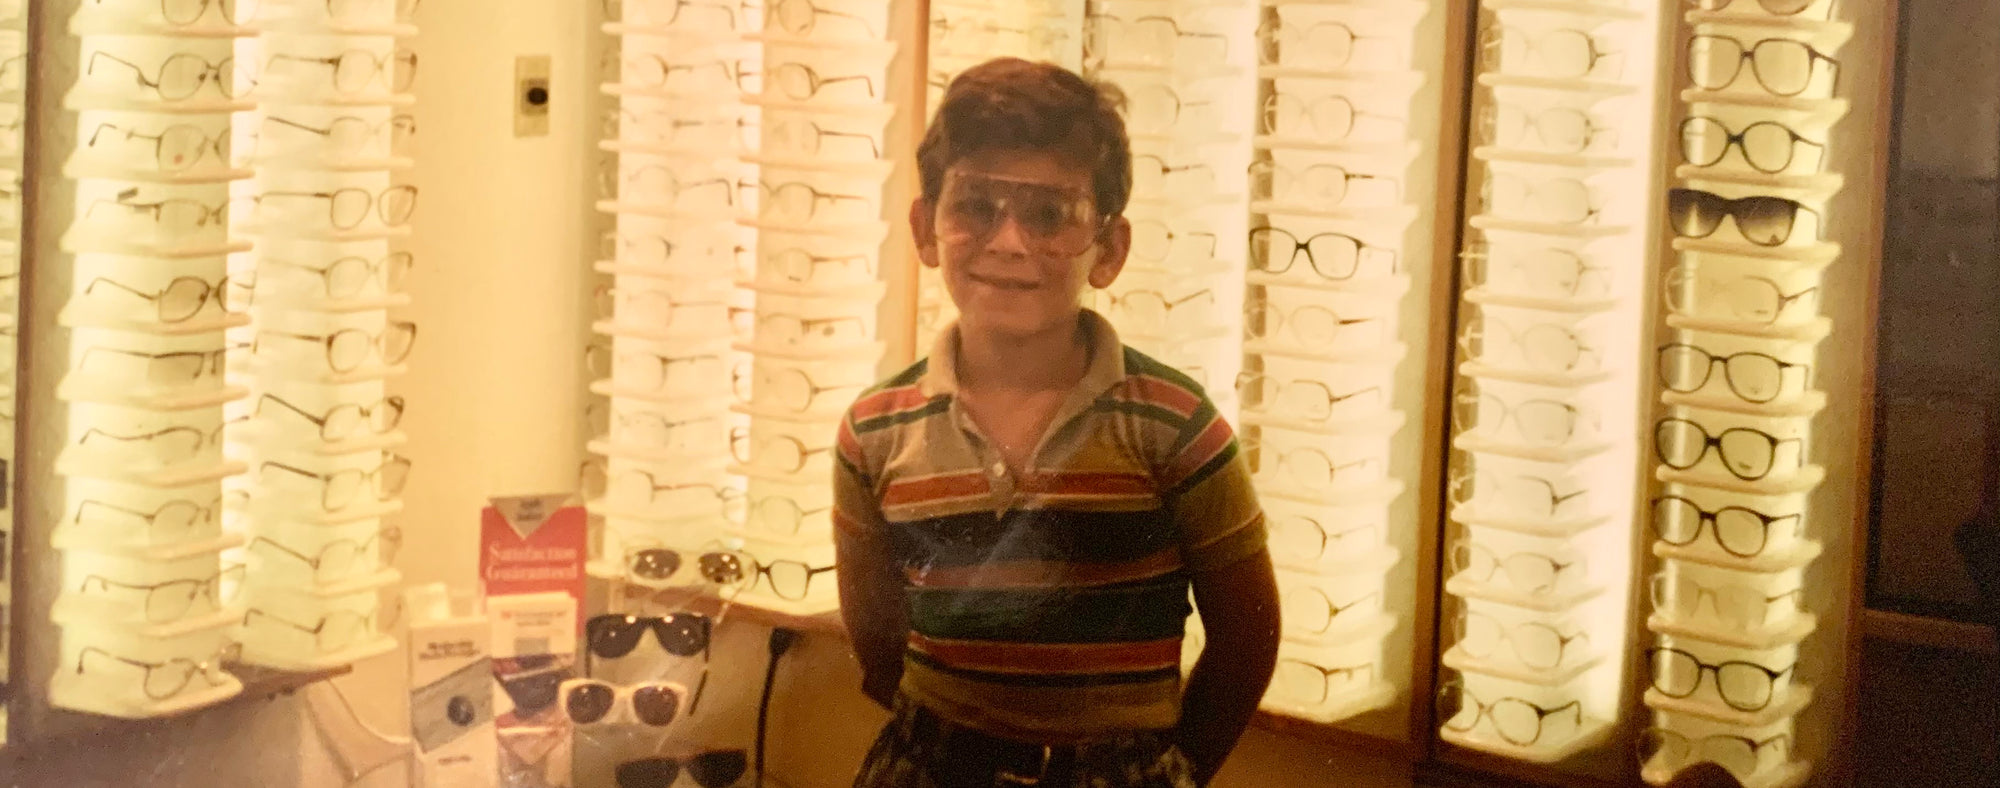 Older Photo of young boy wearing Alexander Daas Sunglasses in Retail Store